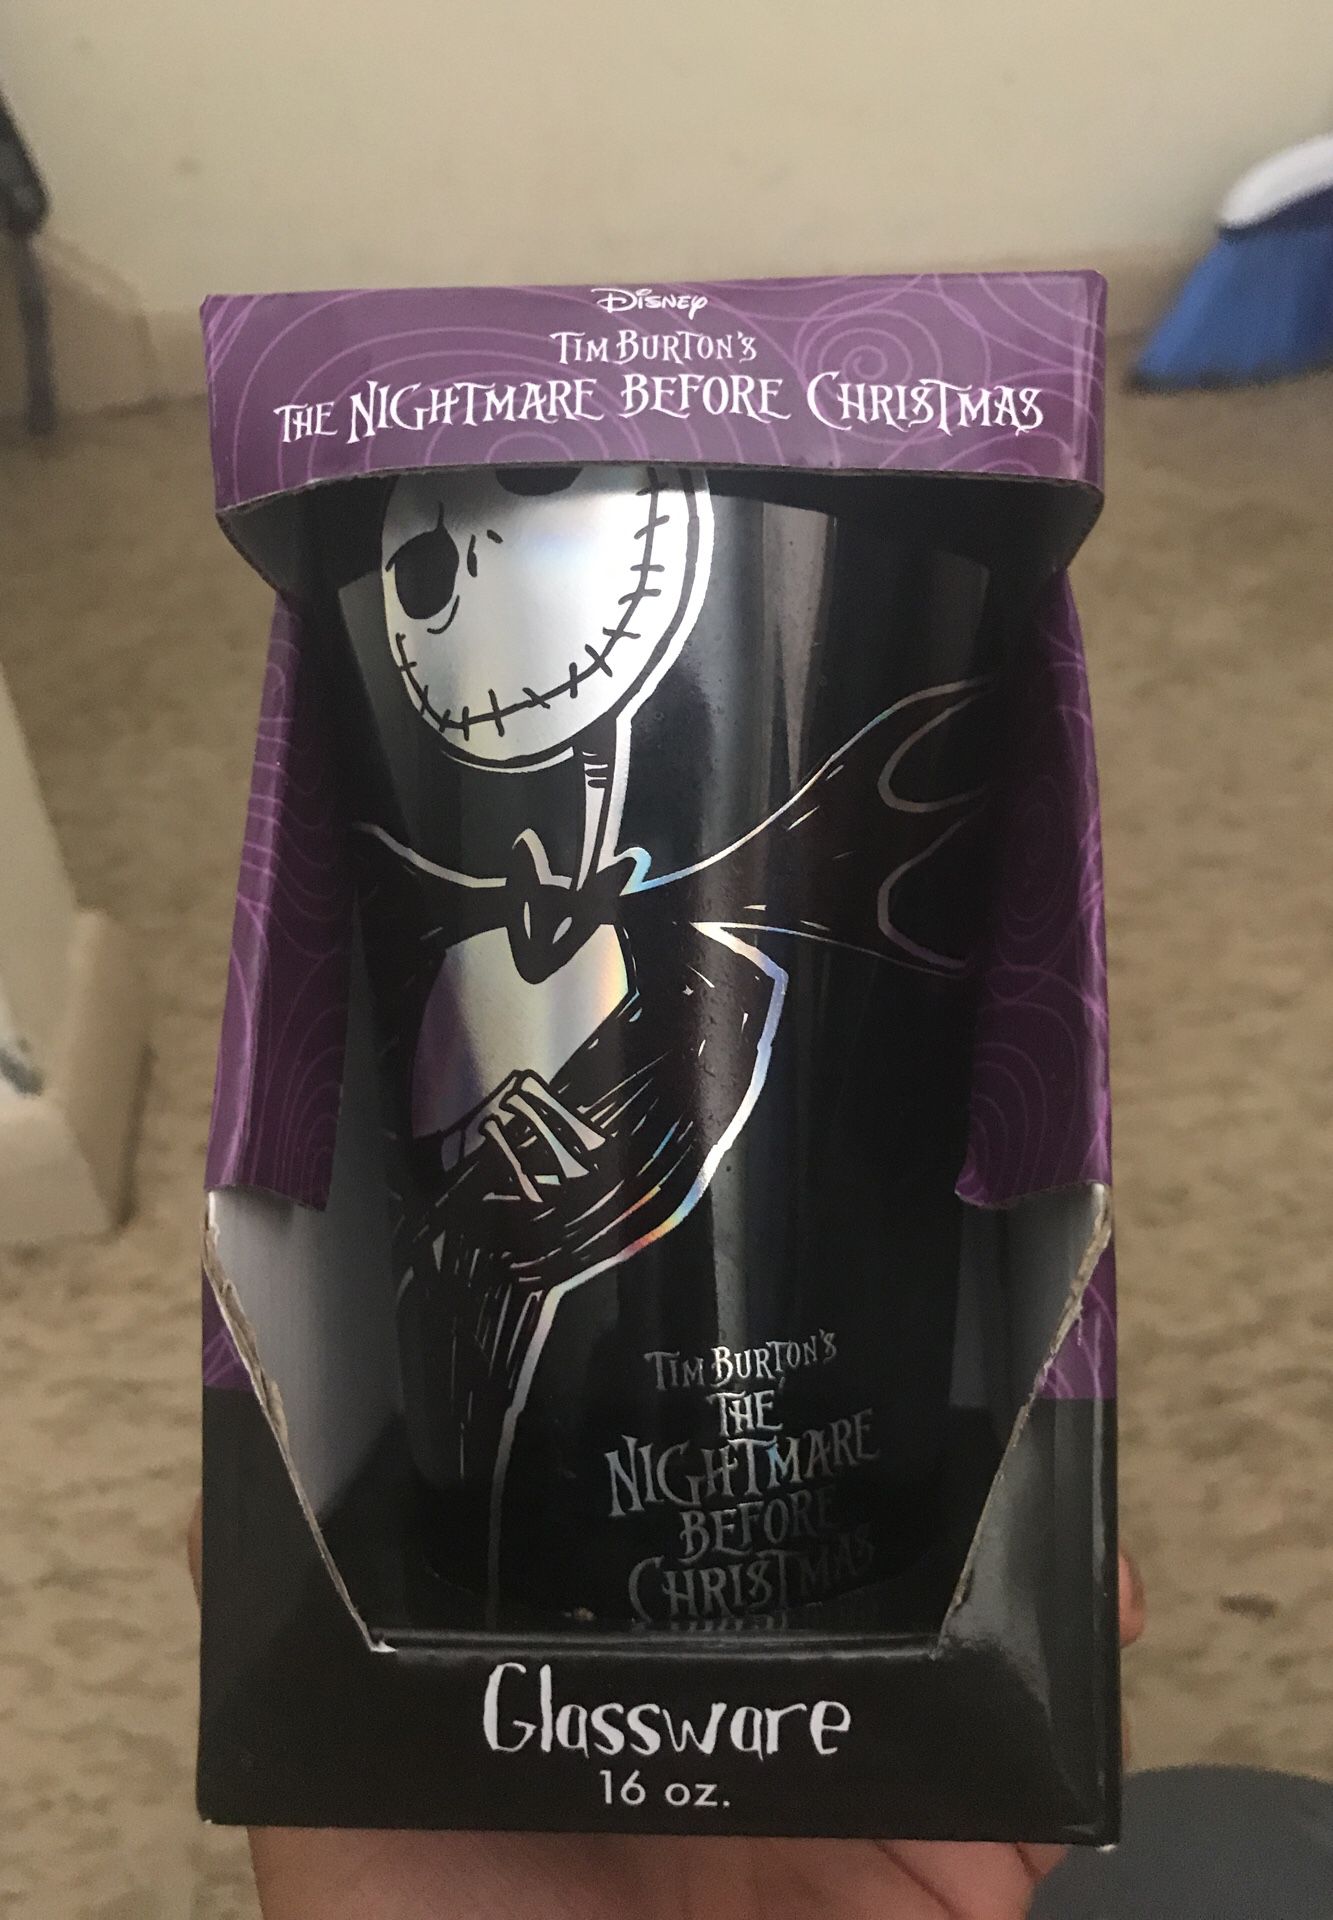 The Nightmare before Christmas cup